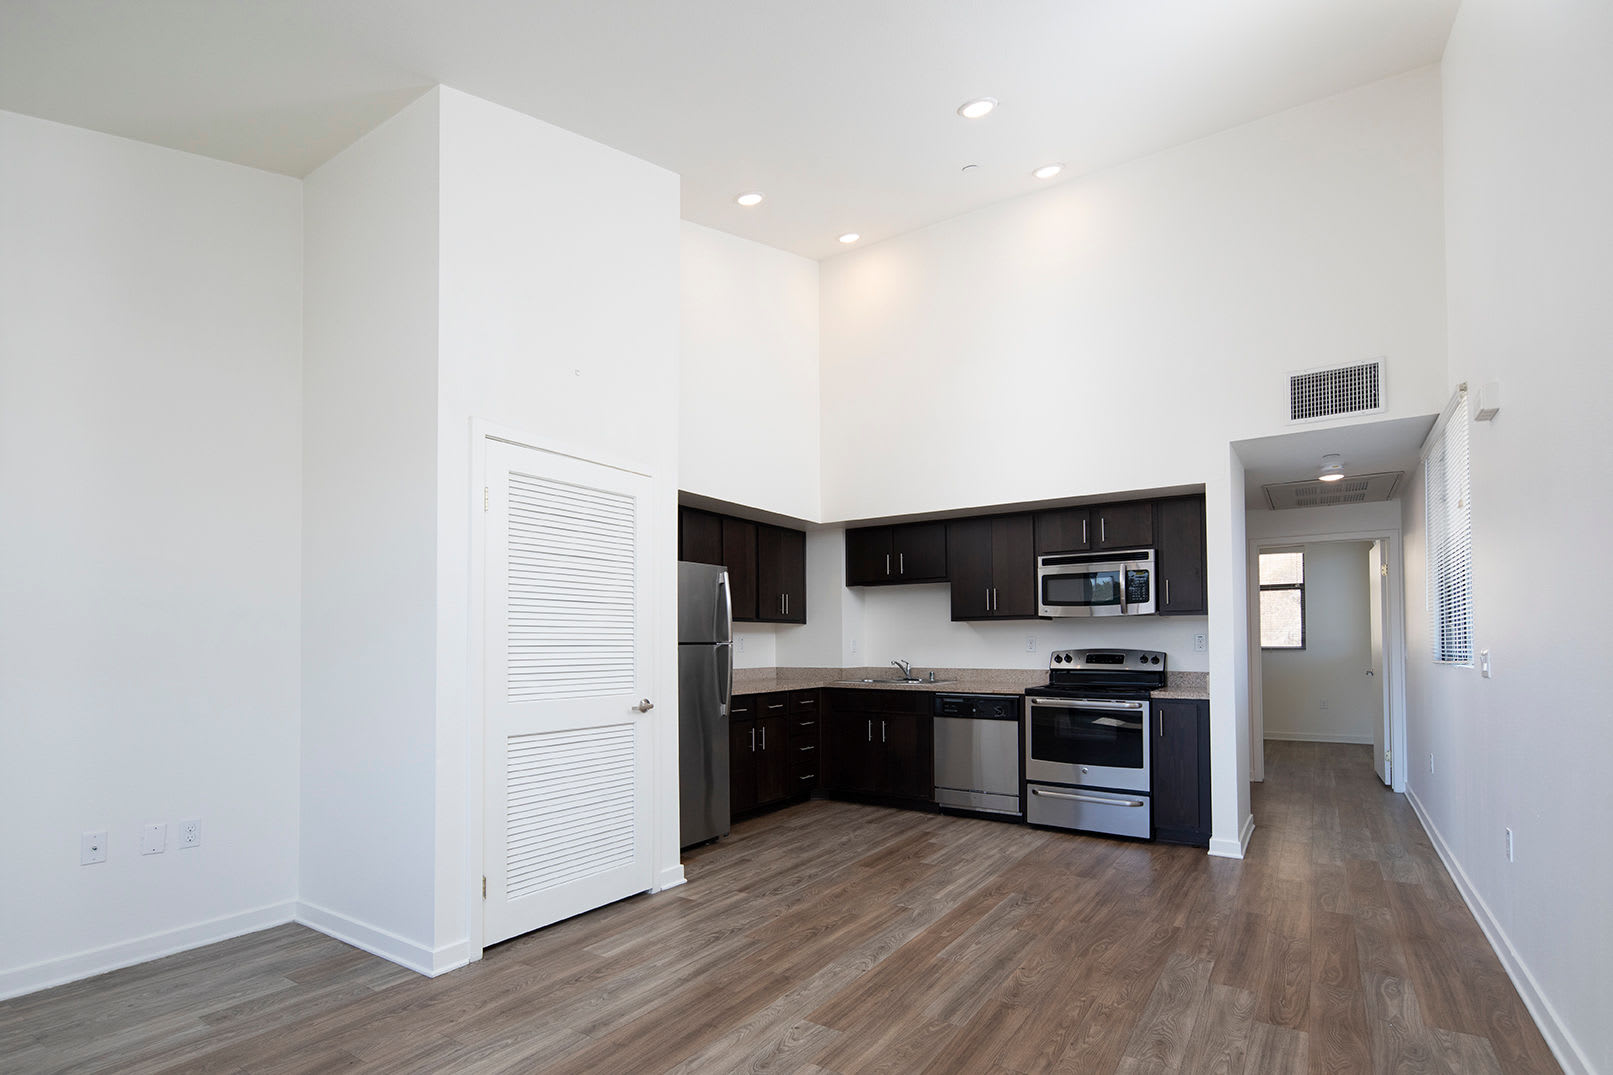 Modern kitchen in a model home's living space at The Quarry Apartments in La Mesa, California